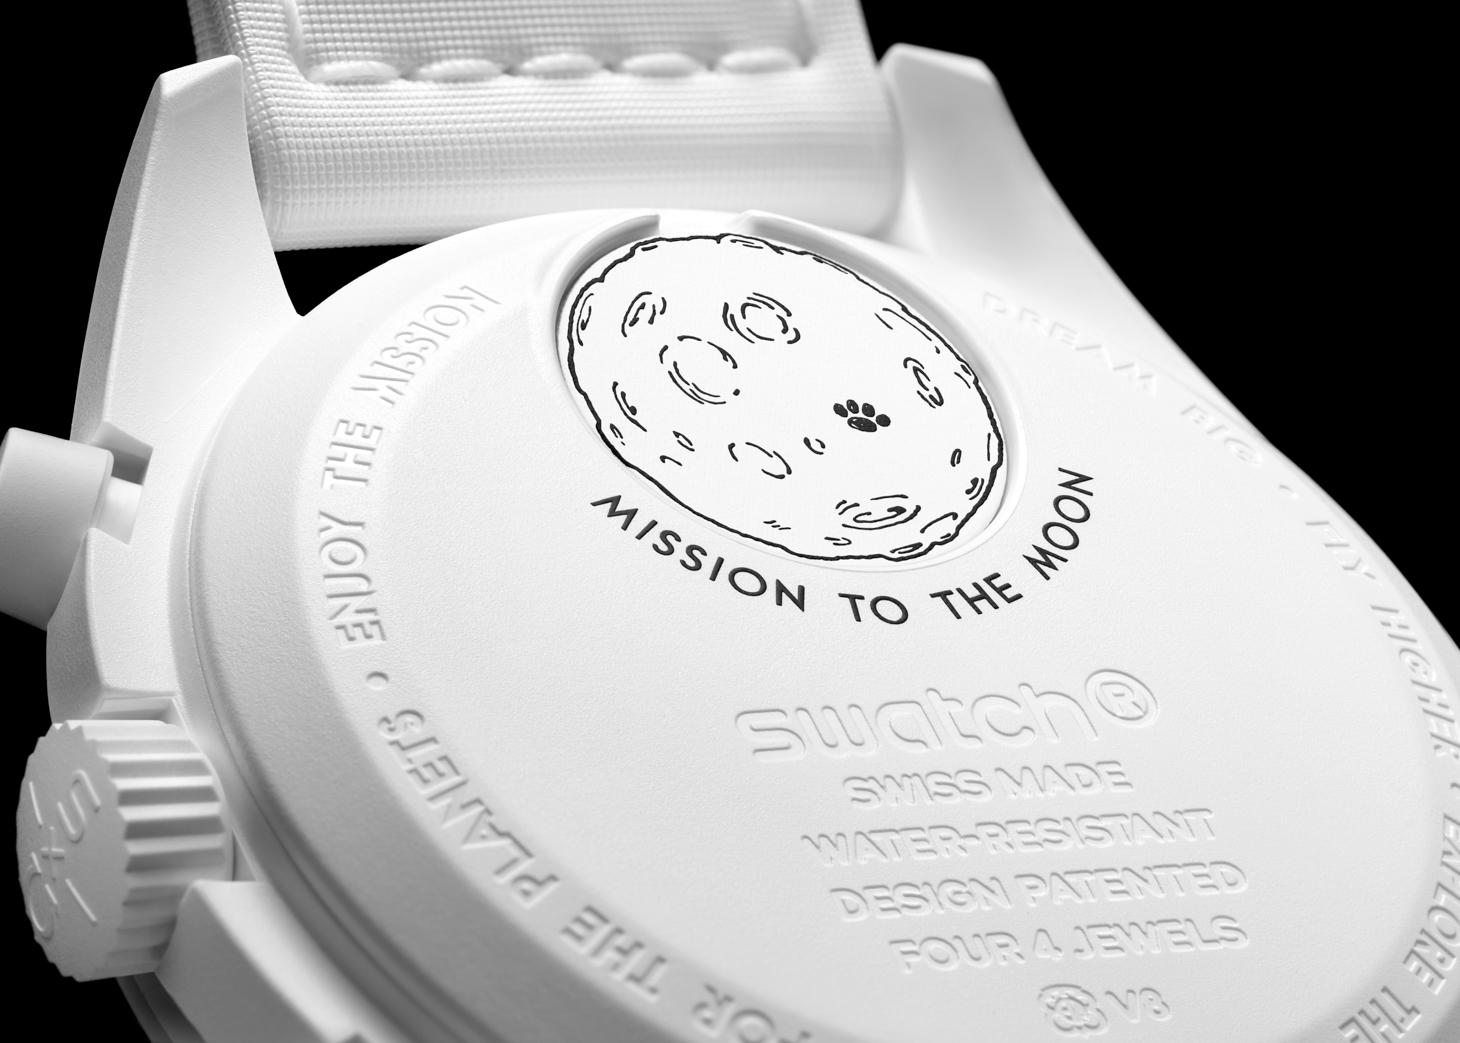 Mission To The Moonphase Snoopy Watch